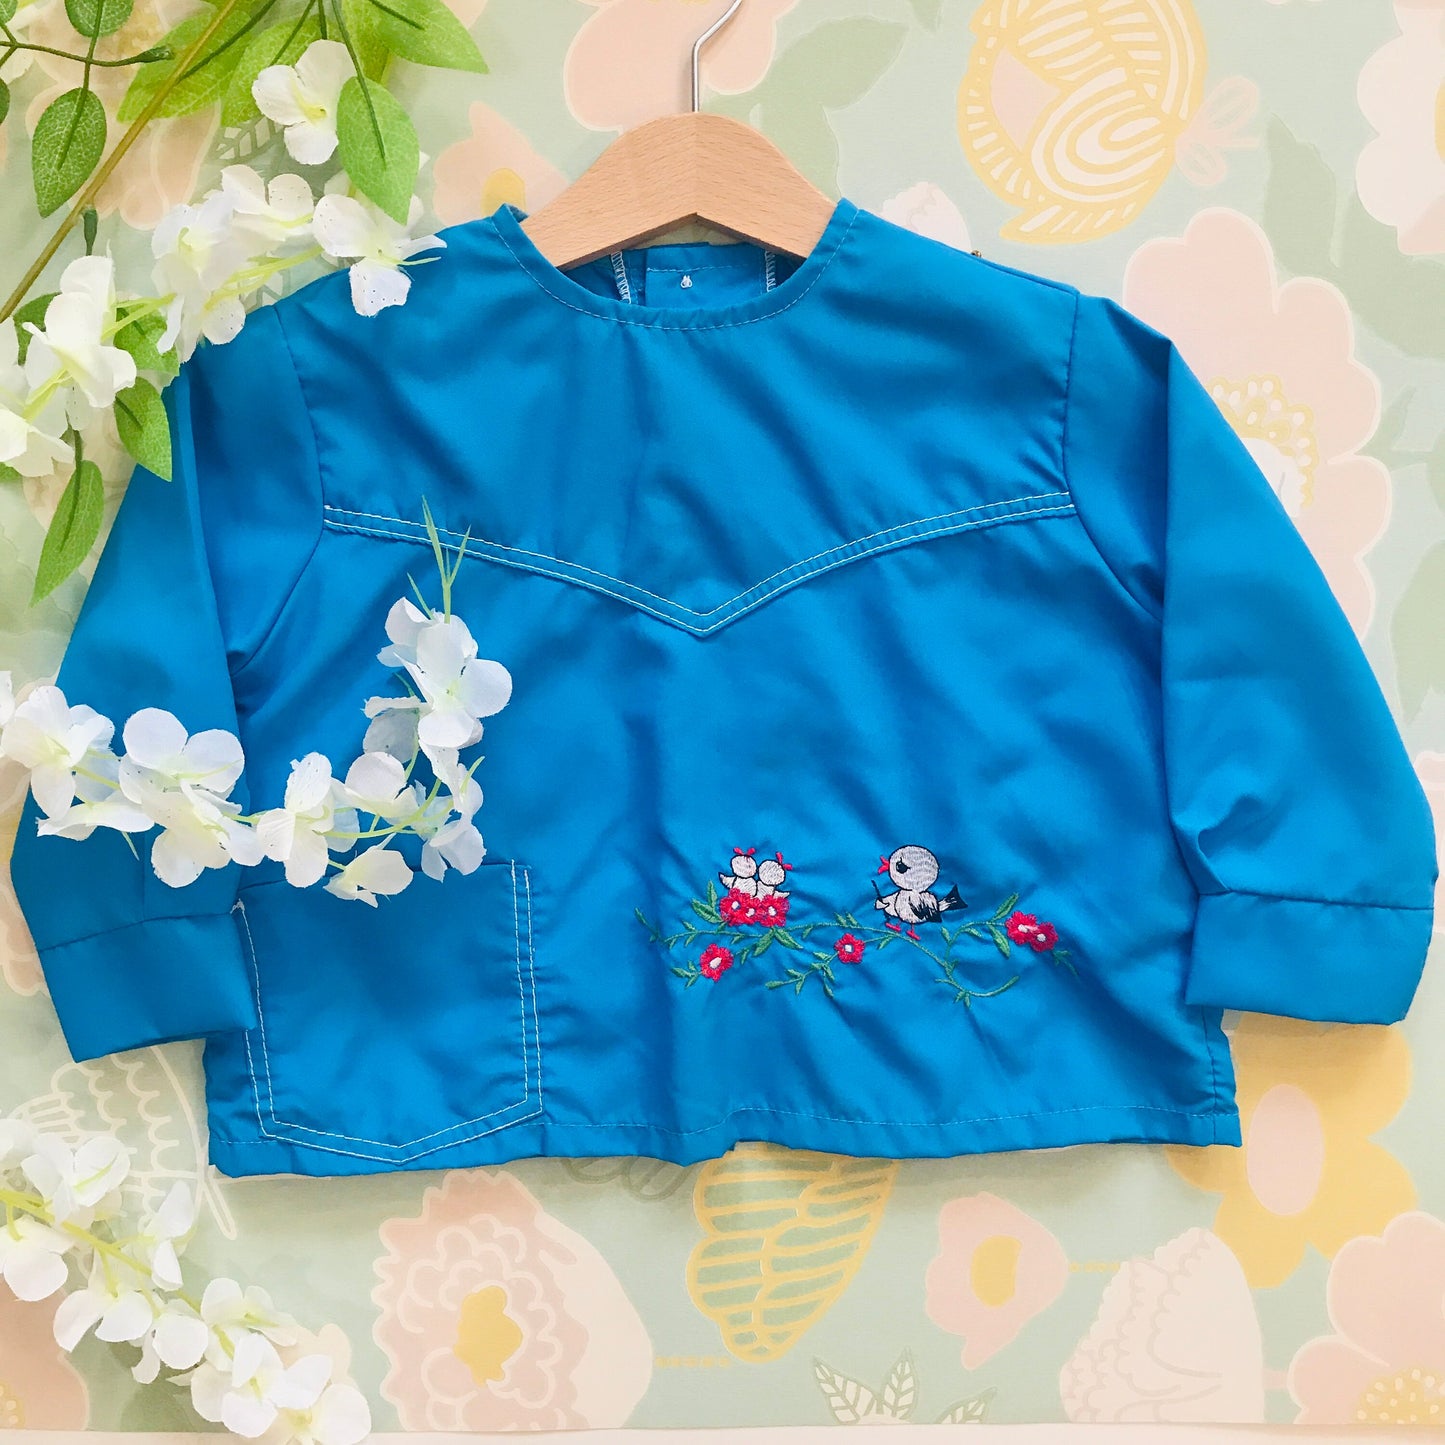 Vintage 1960s Blue "Birdies" Baby / Toddler Nylon Shirt / Blouse French Made 12-18 Months